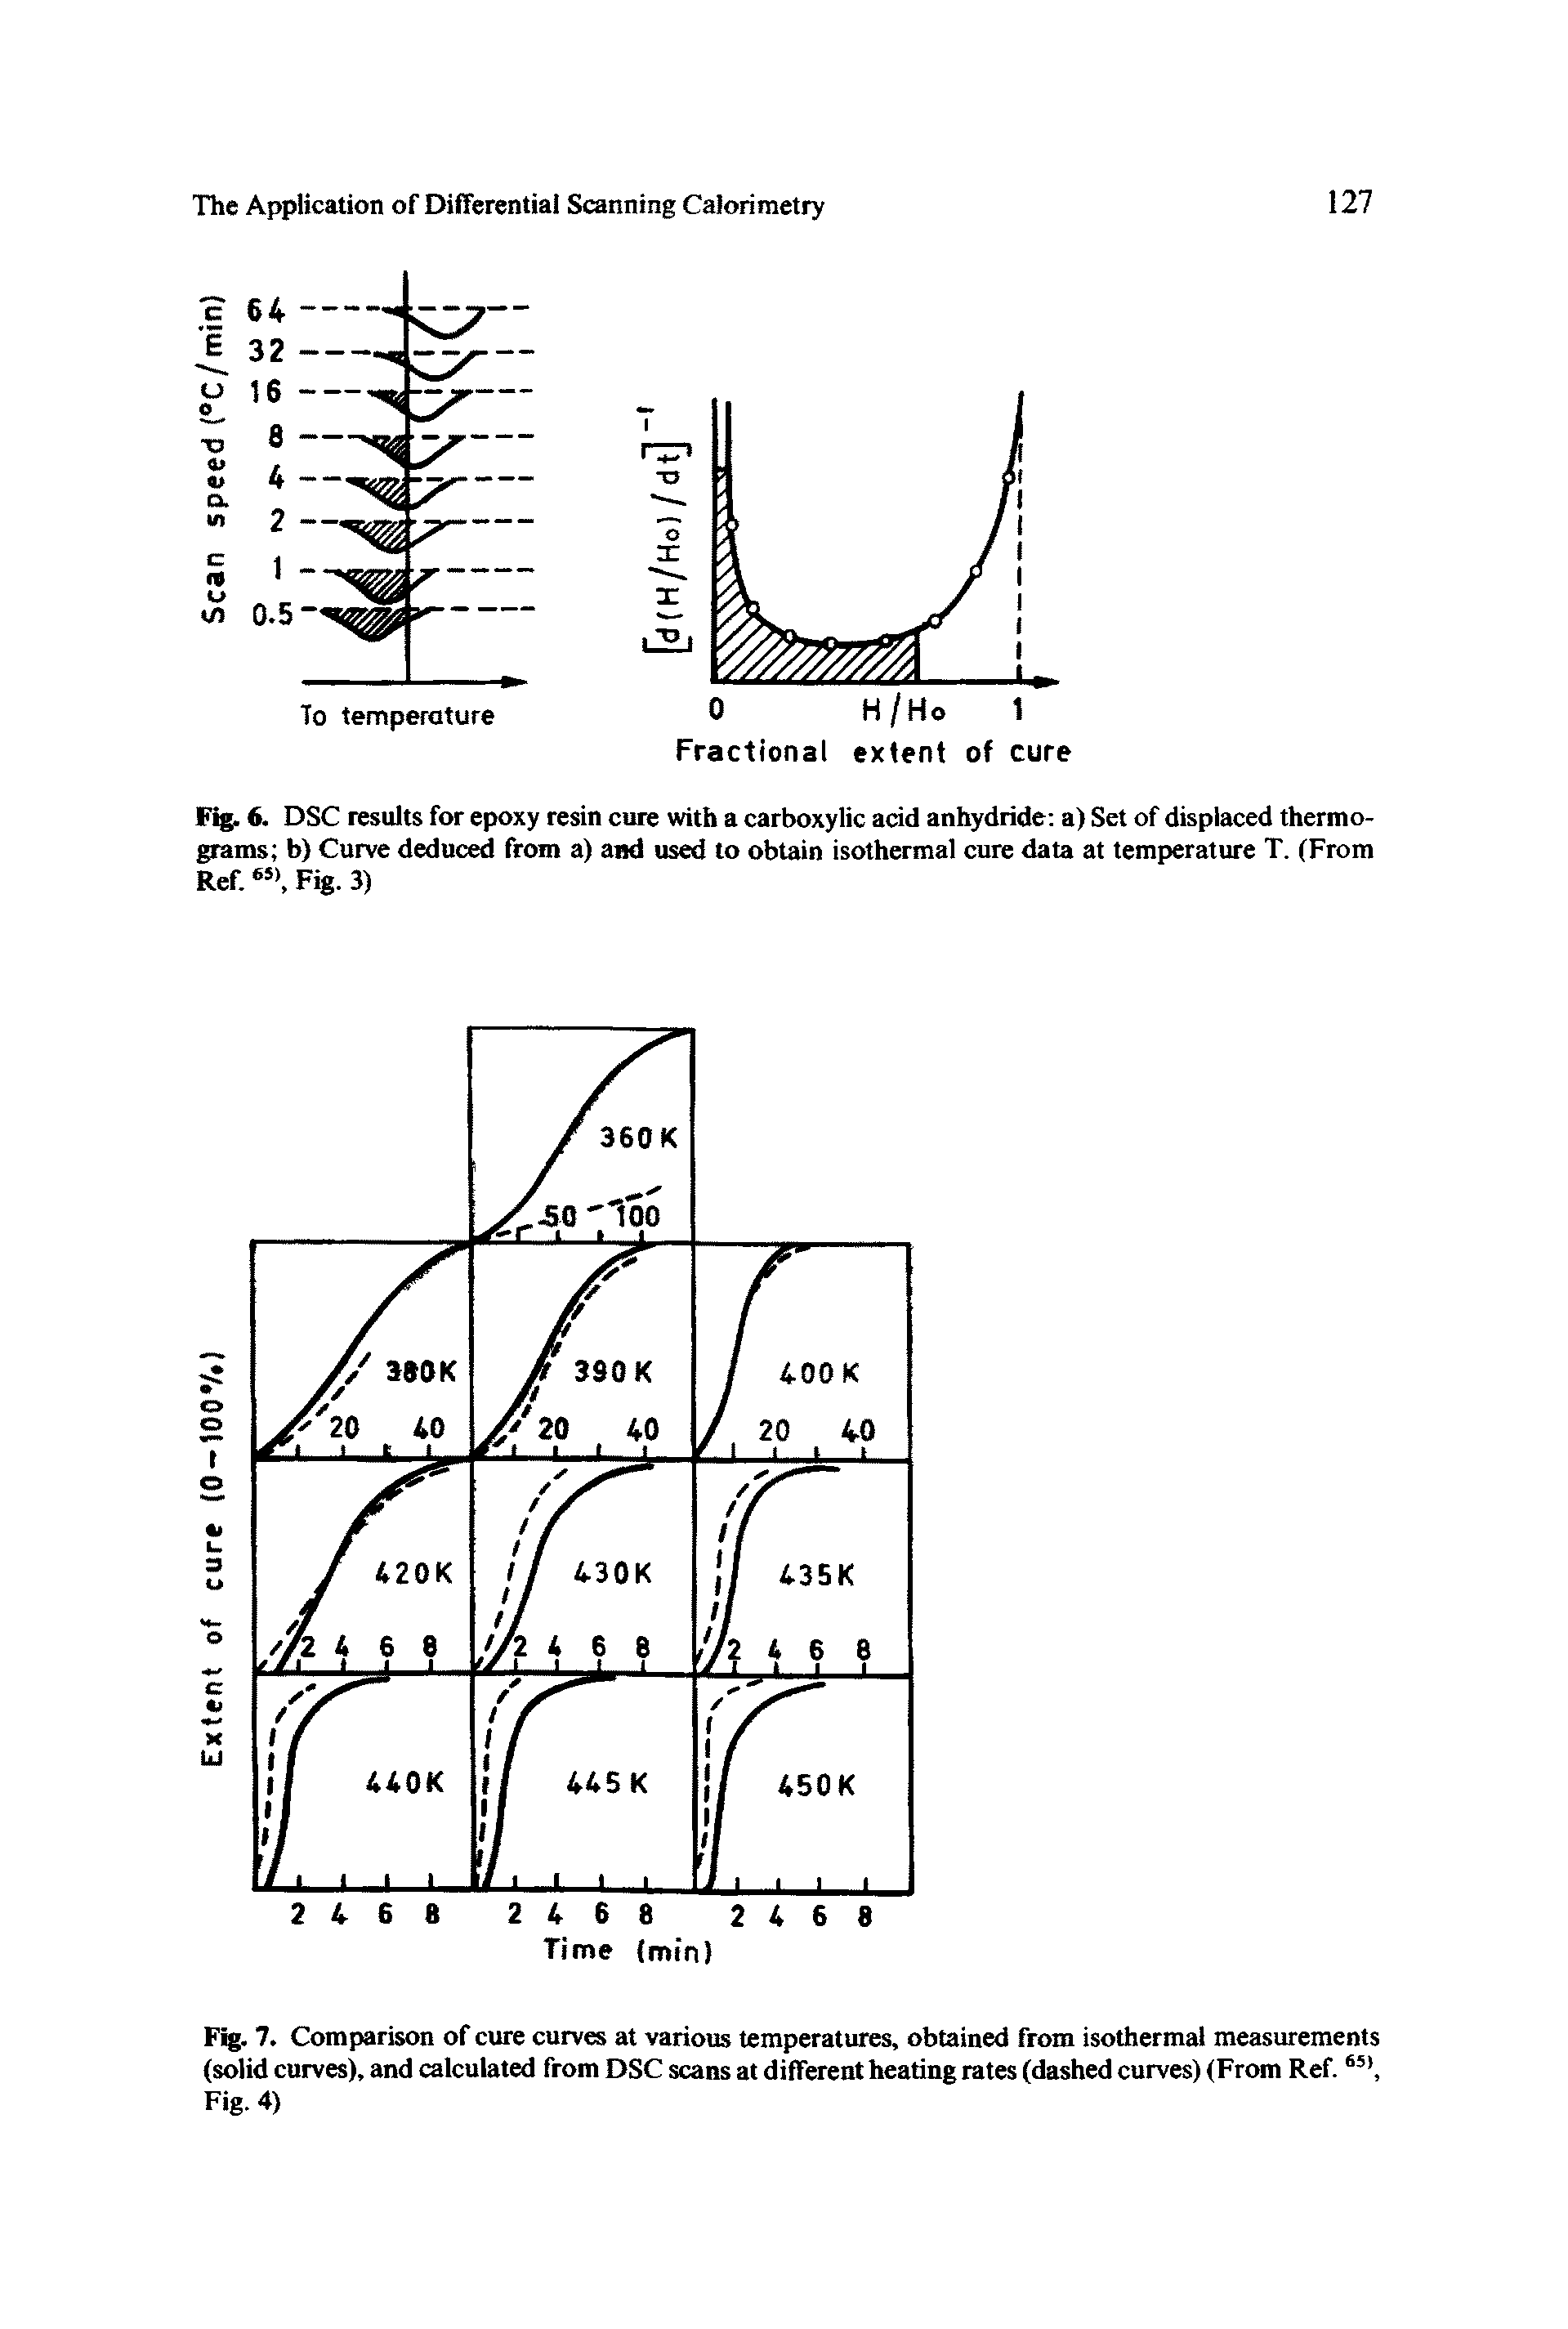 Fig. 6. DSC results for epoxy resin cure with a carboxylic acid anhydride a) Set of displaced thermo-grams b) Curve deduced from a) and used to obtain isothermal cure data at temperature T. (From Ref.65), Fig. 3)...